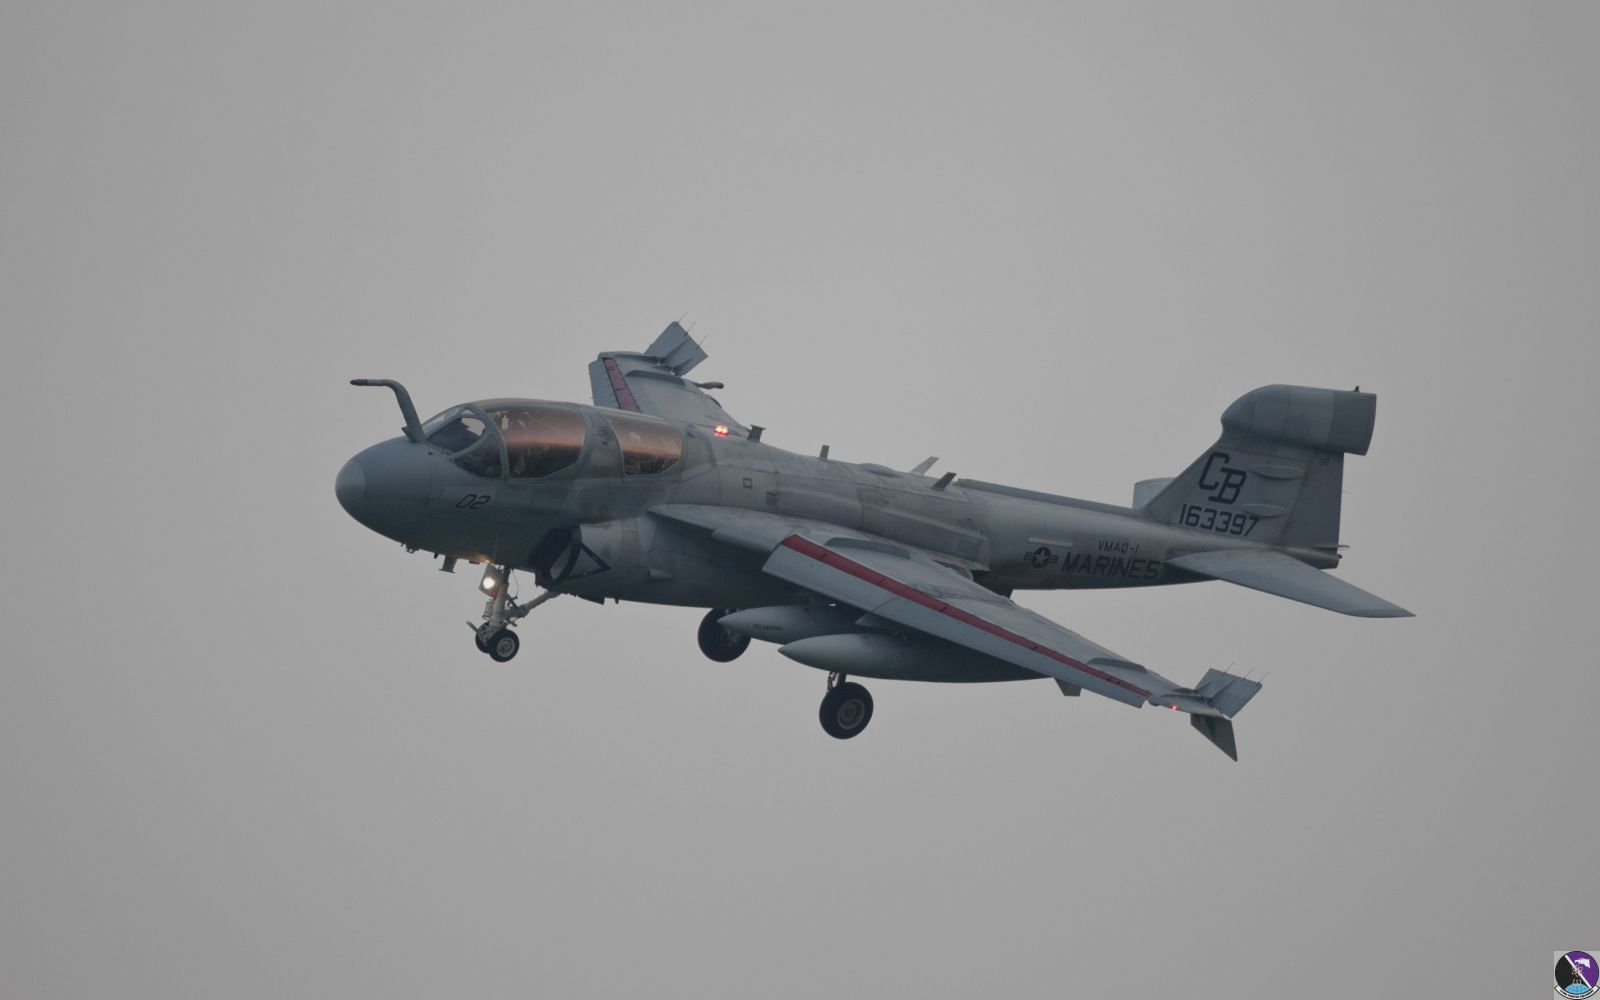 aviano september 10  2011 trend31 ea 6b 163397 02  cb  vmaq 1 mcas cherry point  nc banshee come from homebase for deployment